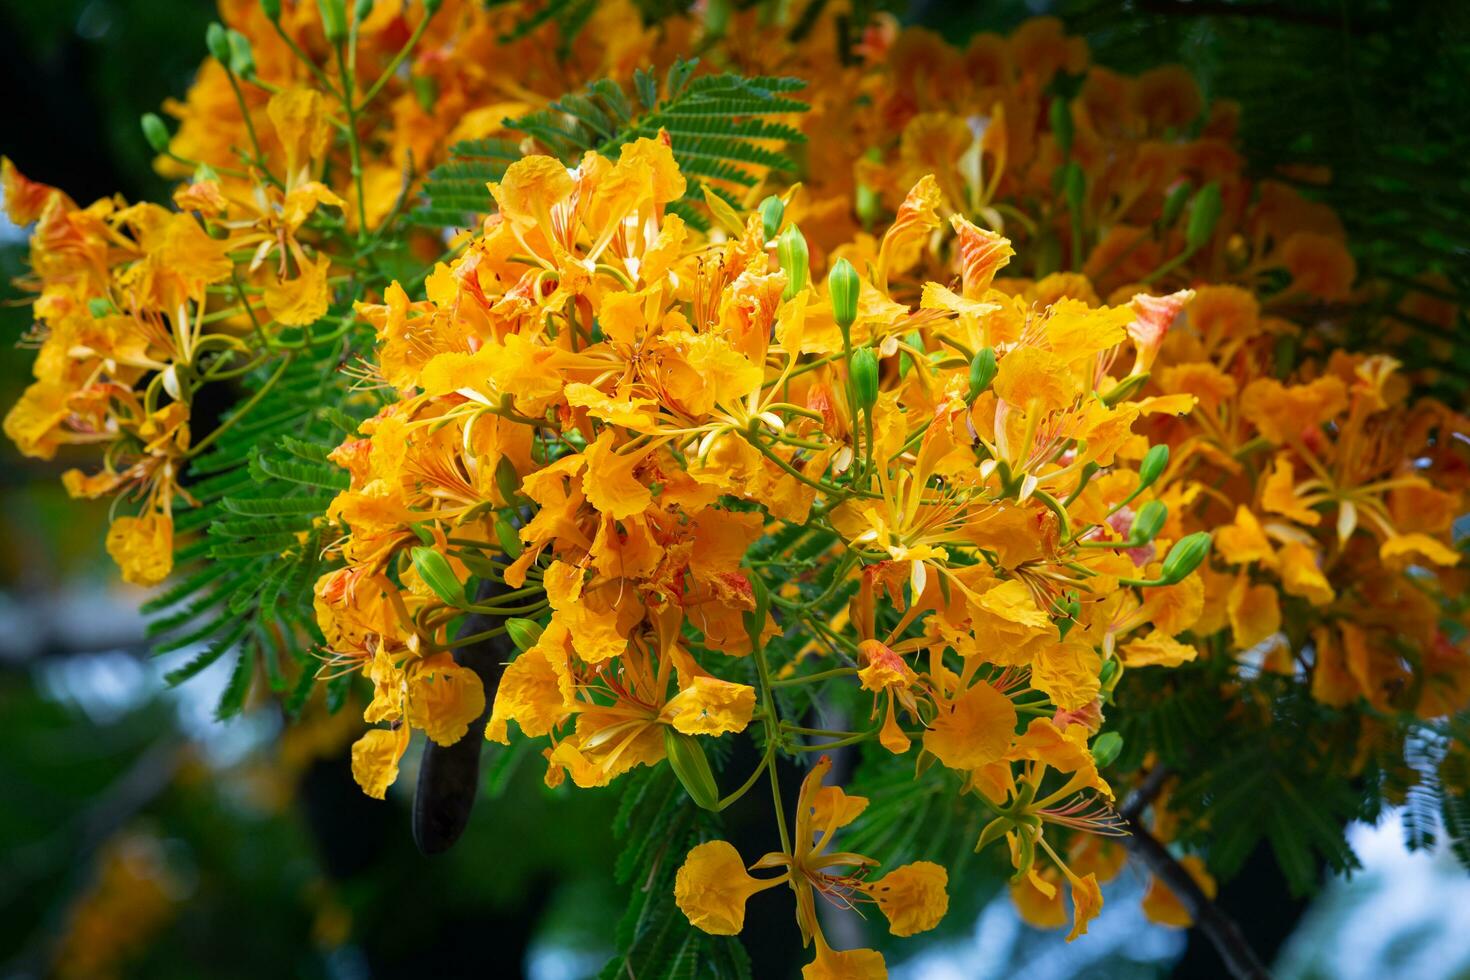 The Royal Poinciana tree has a common name in the Thai language. The flame is a large perennial plant. Deciduous in the dry season The crown is wide, the flowers are many, dark yellow, orange, red. photo